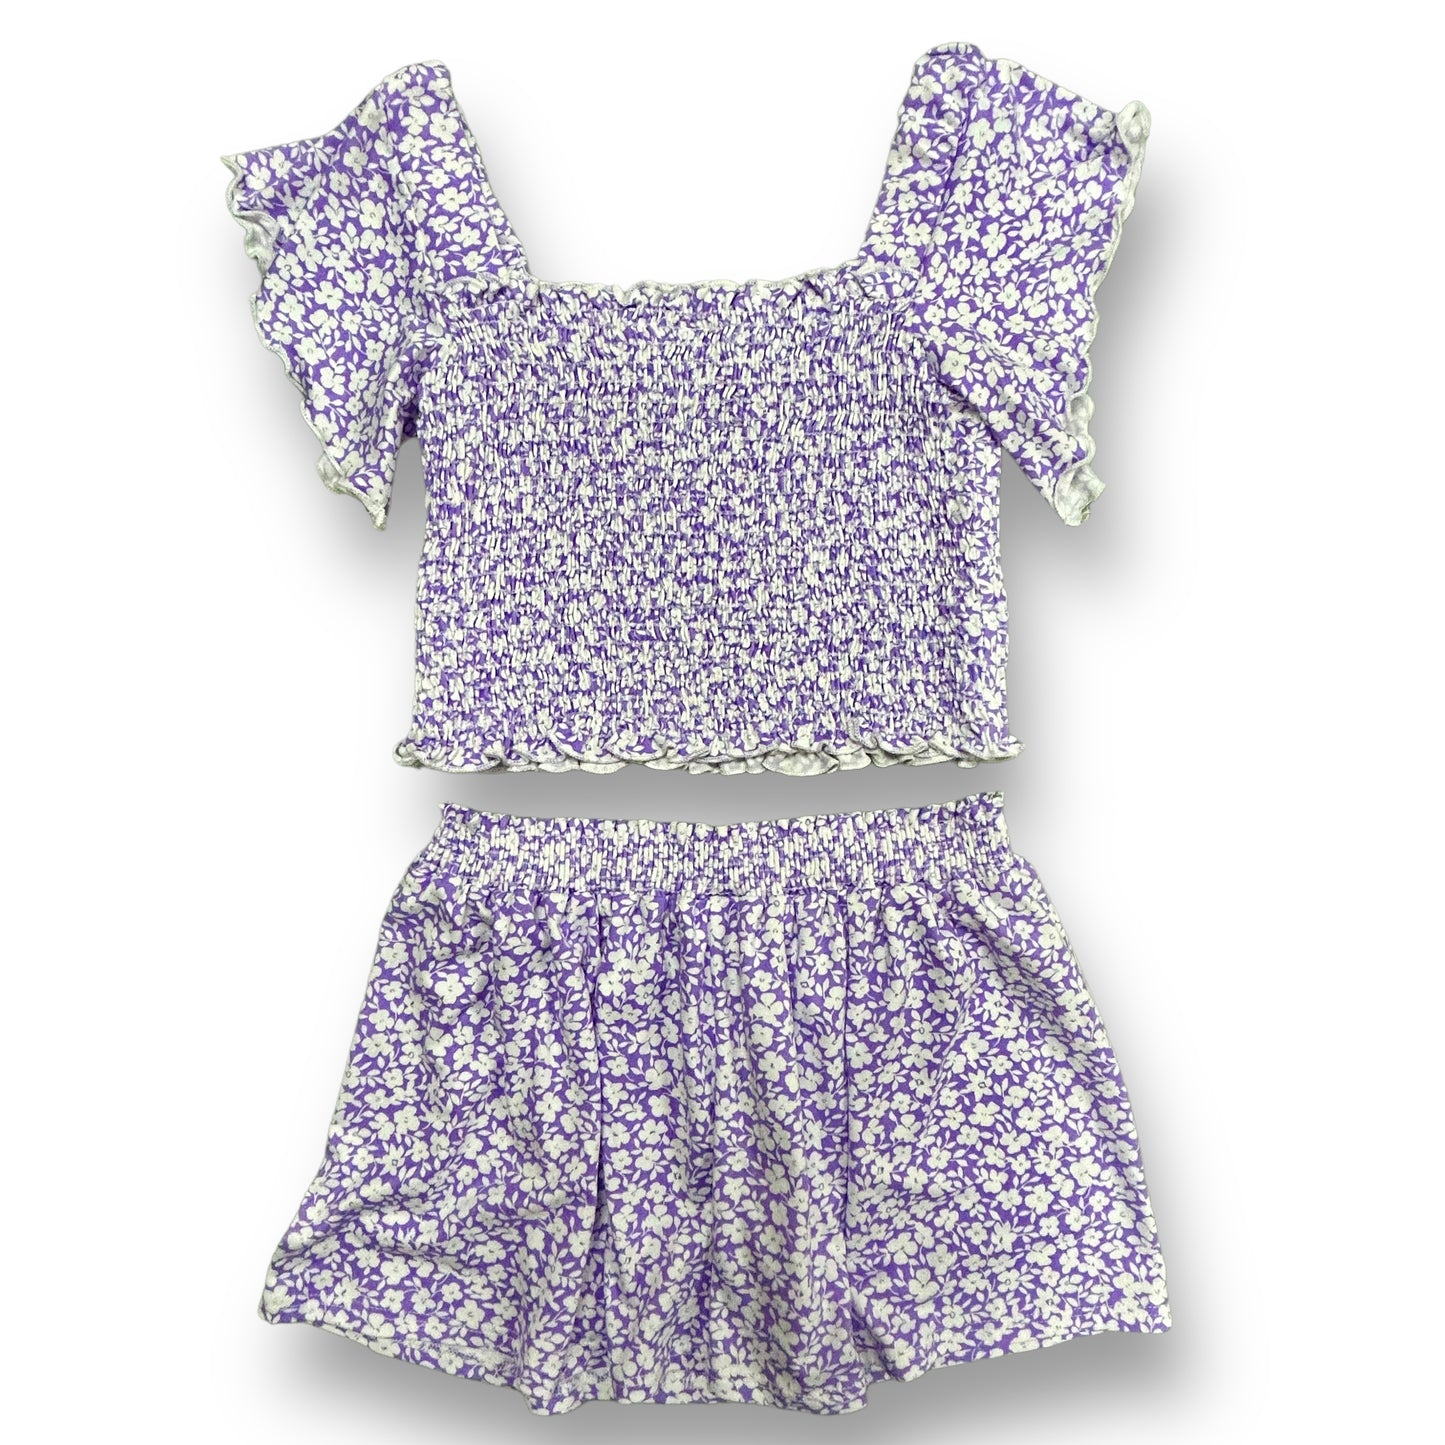 Girls Tweenstyle by Stoopher Size 14 Purple & White Floral Print Outfit